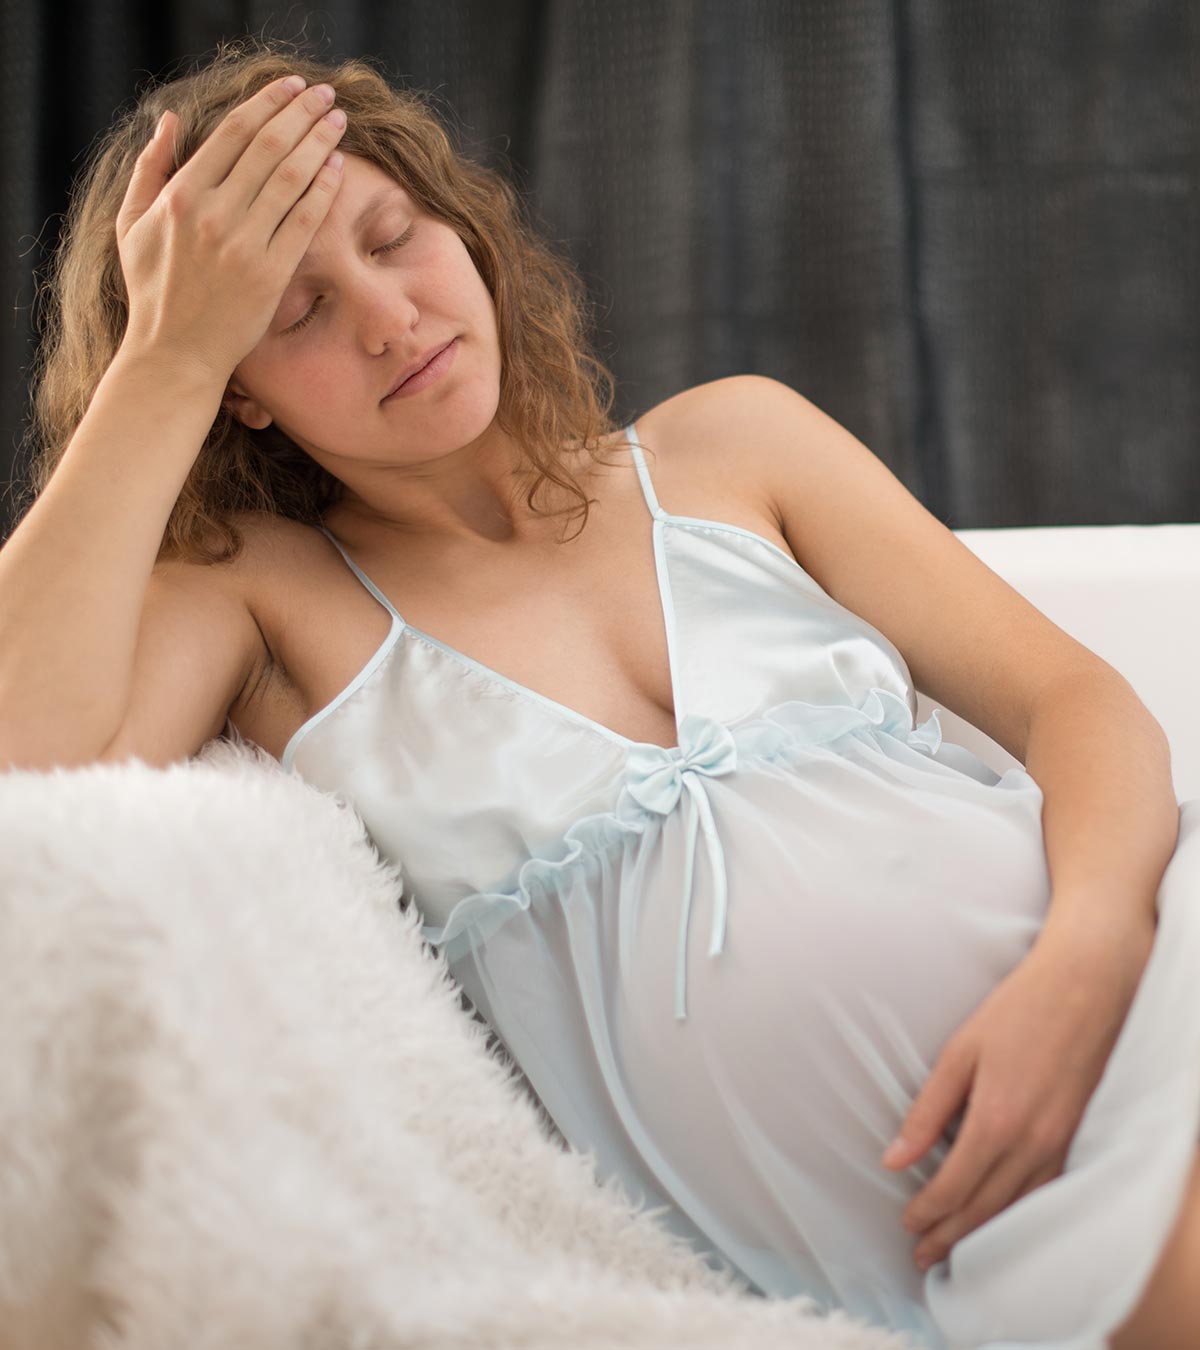 intercourse during after pregnancy sexual bleeding